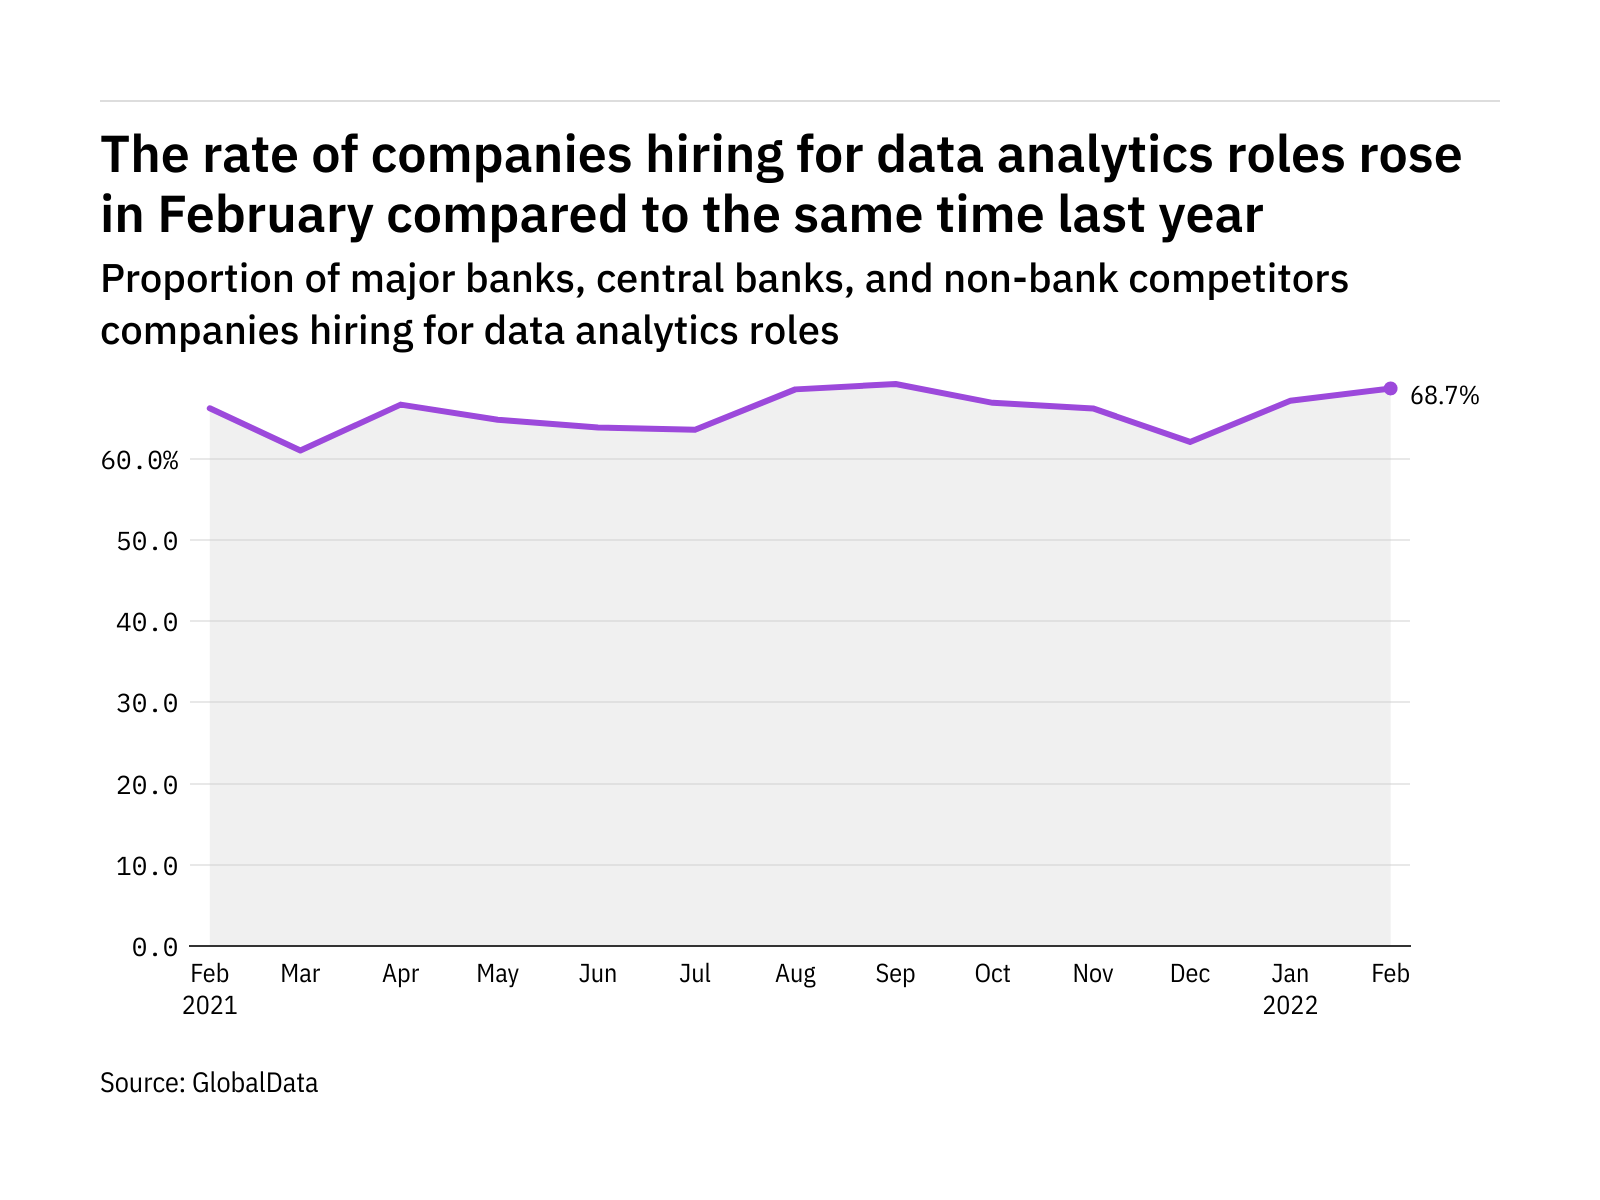 Data analytics hiring levels in the retail banking industry rose in February 2022